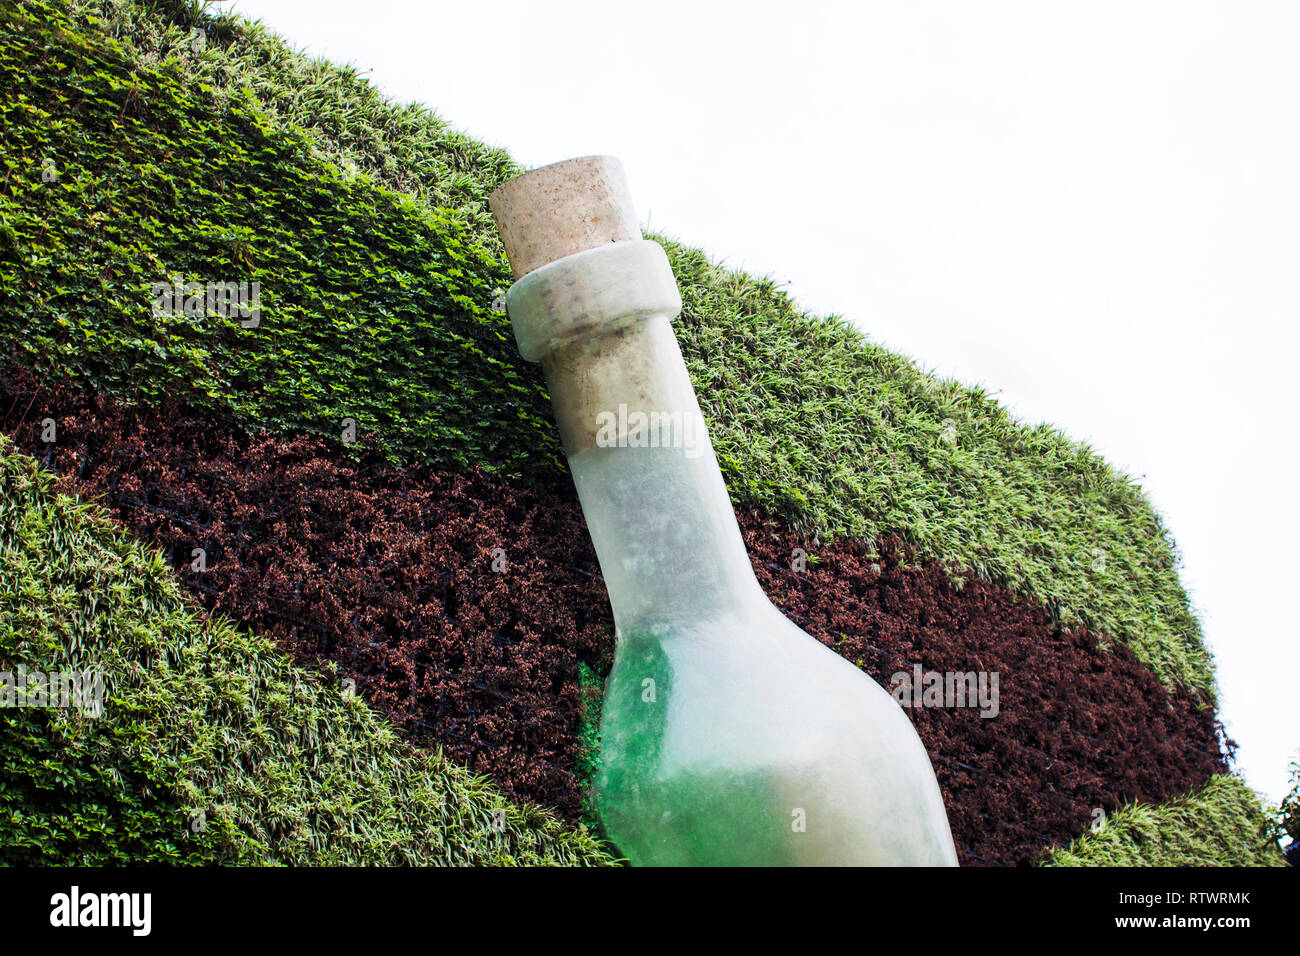 Art Installation of Bottle on the Wall with Plants on Facade. Green Facade with Art Installation. Giant Art Work. Stock Photo